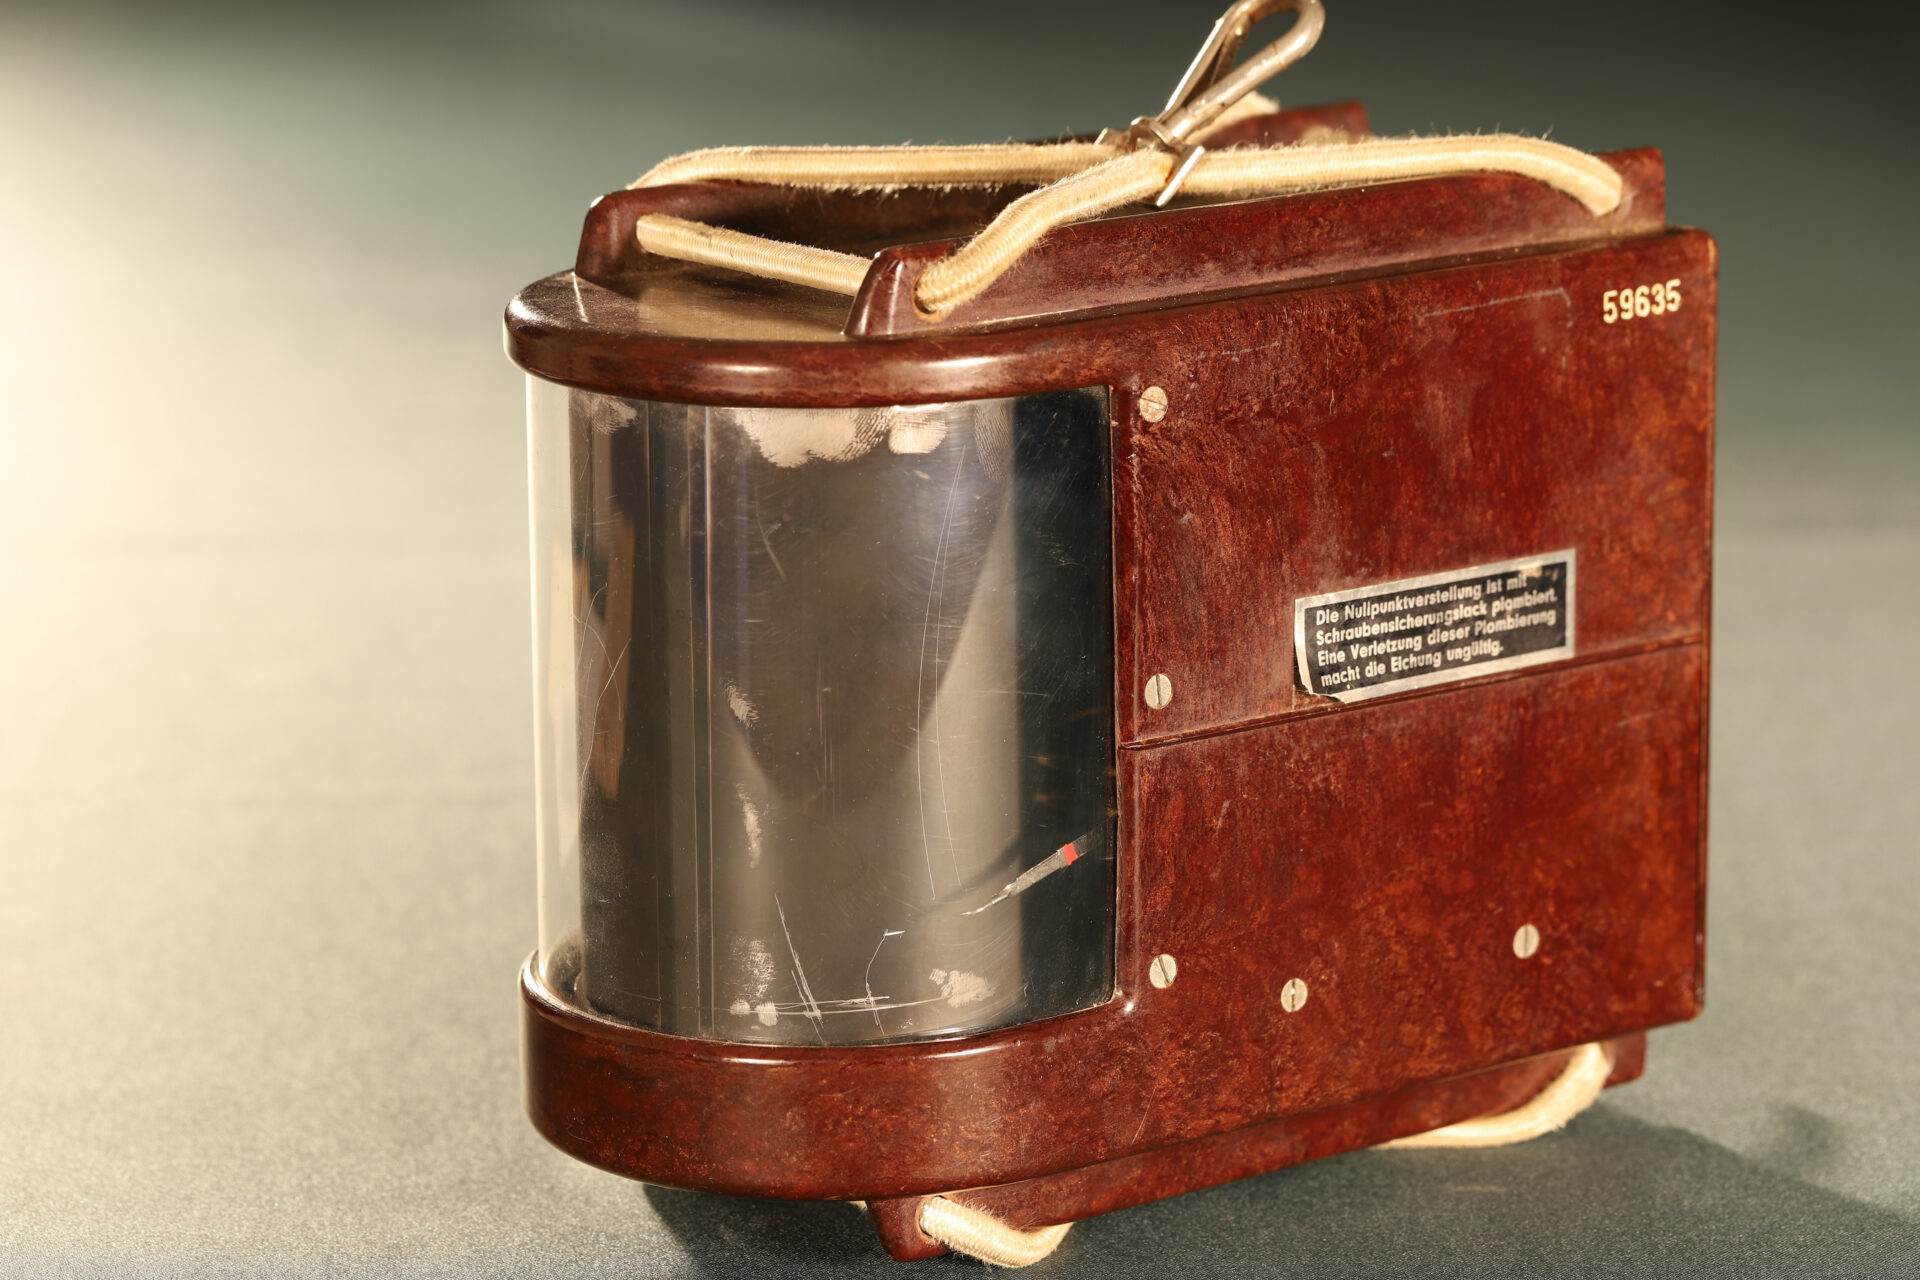 Image of front of Winter Height Recorder No 59635 c1930